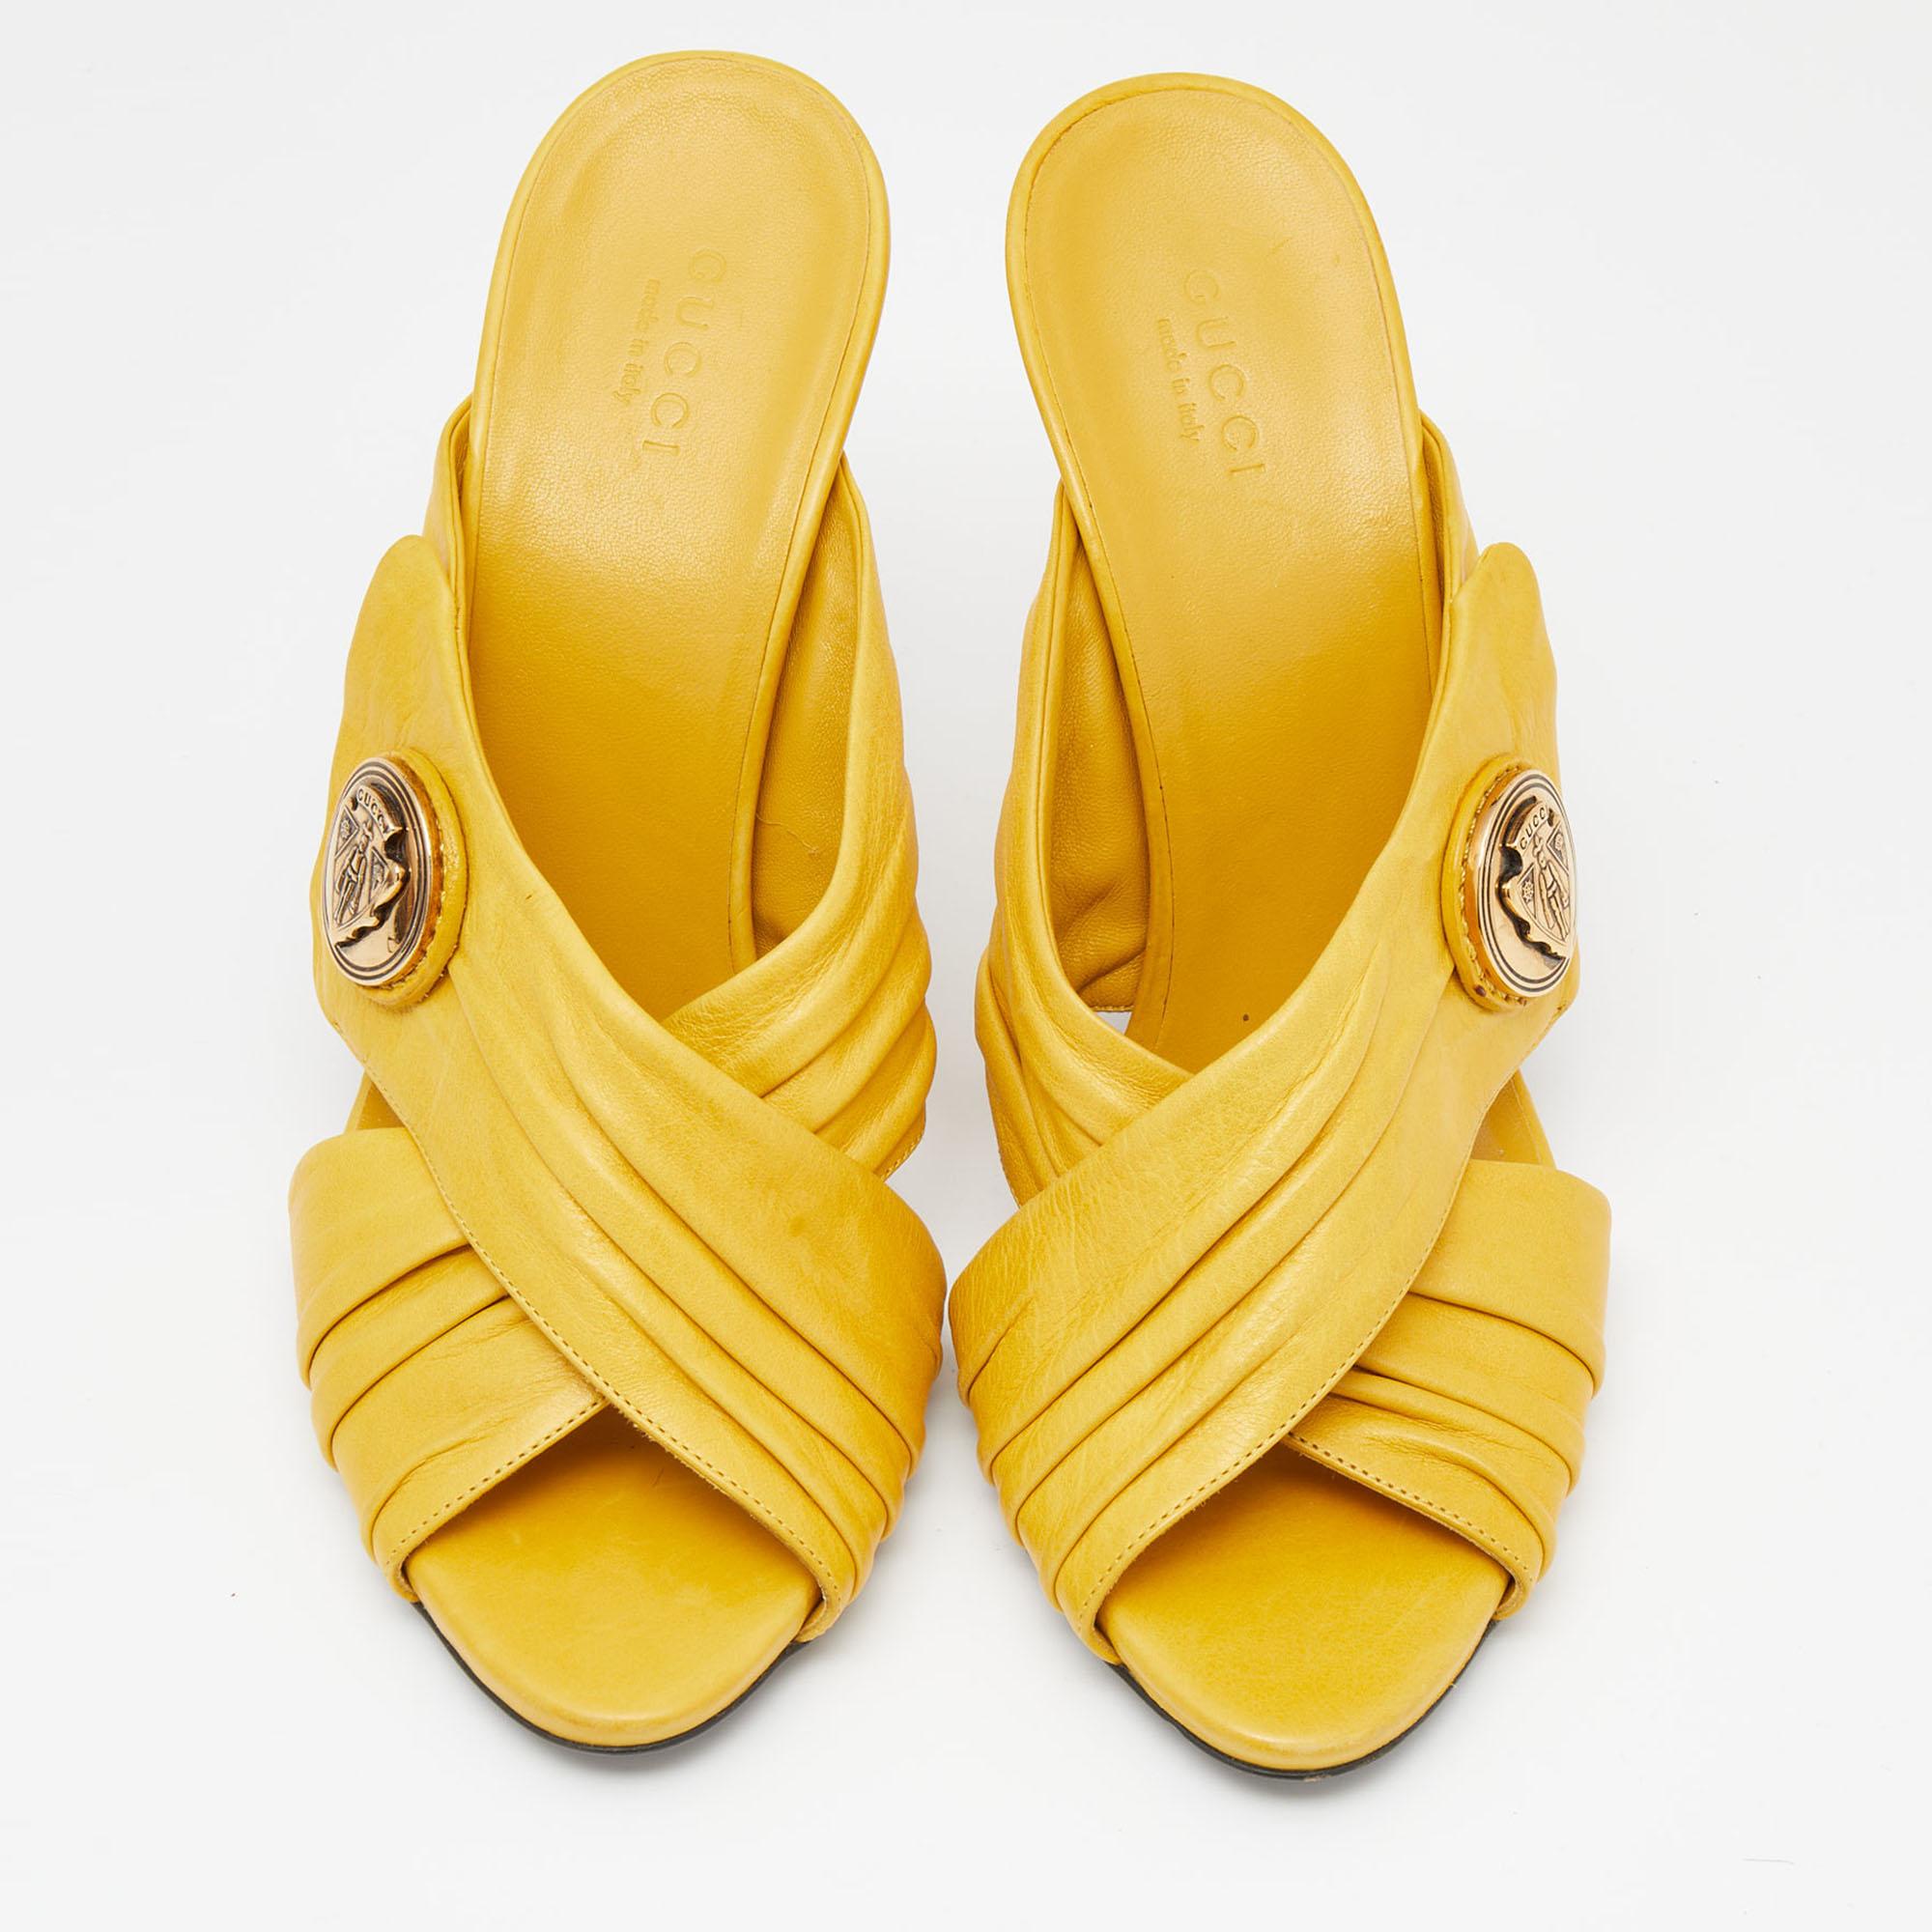 Wear these elegant and minimal Gucci slides that will assist you on many occasions. The vibrant yellow sandals are made from leather and are accented with gold-tone brand emblems and 11 cm heels for the right amount of elevation.

Includes: Original